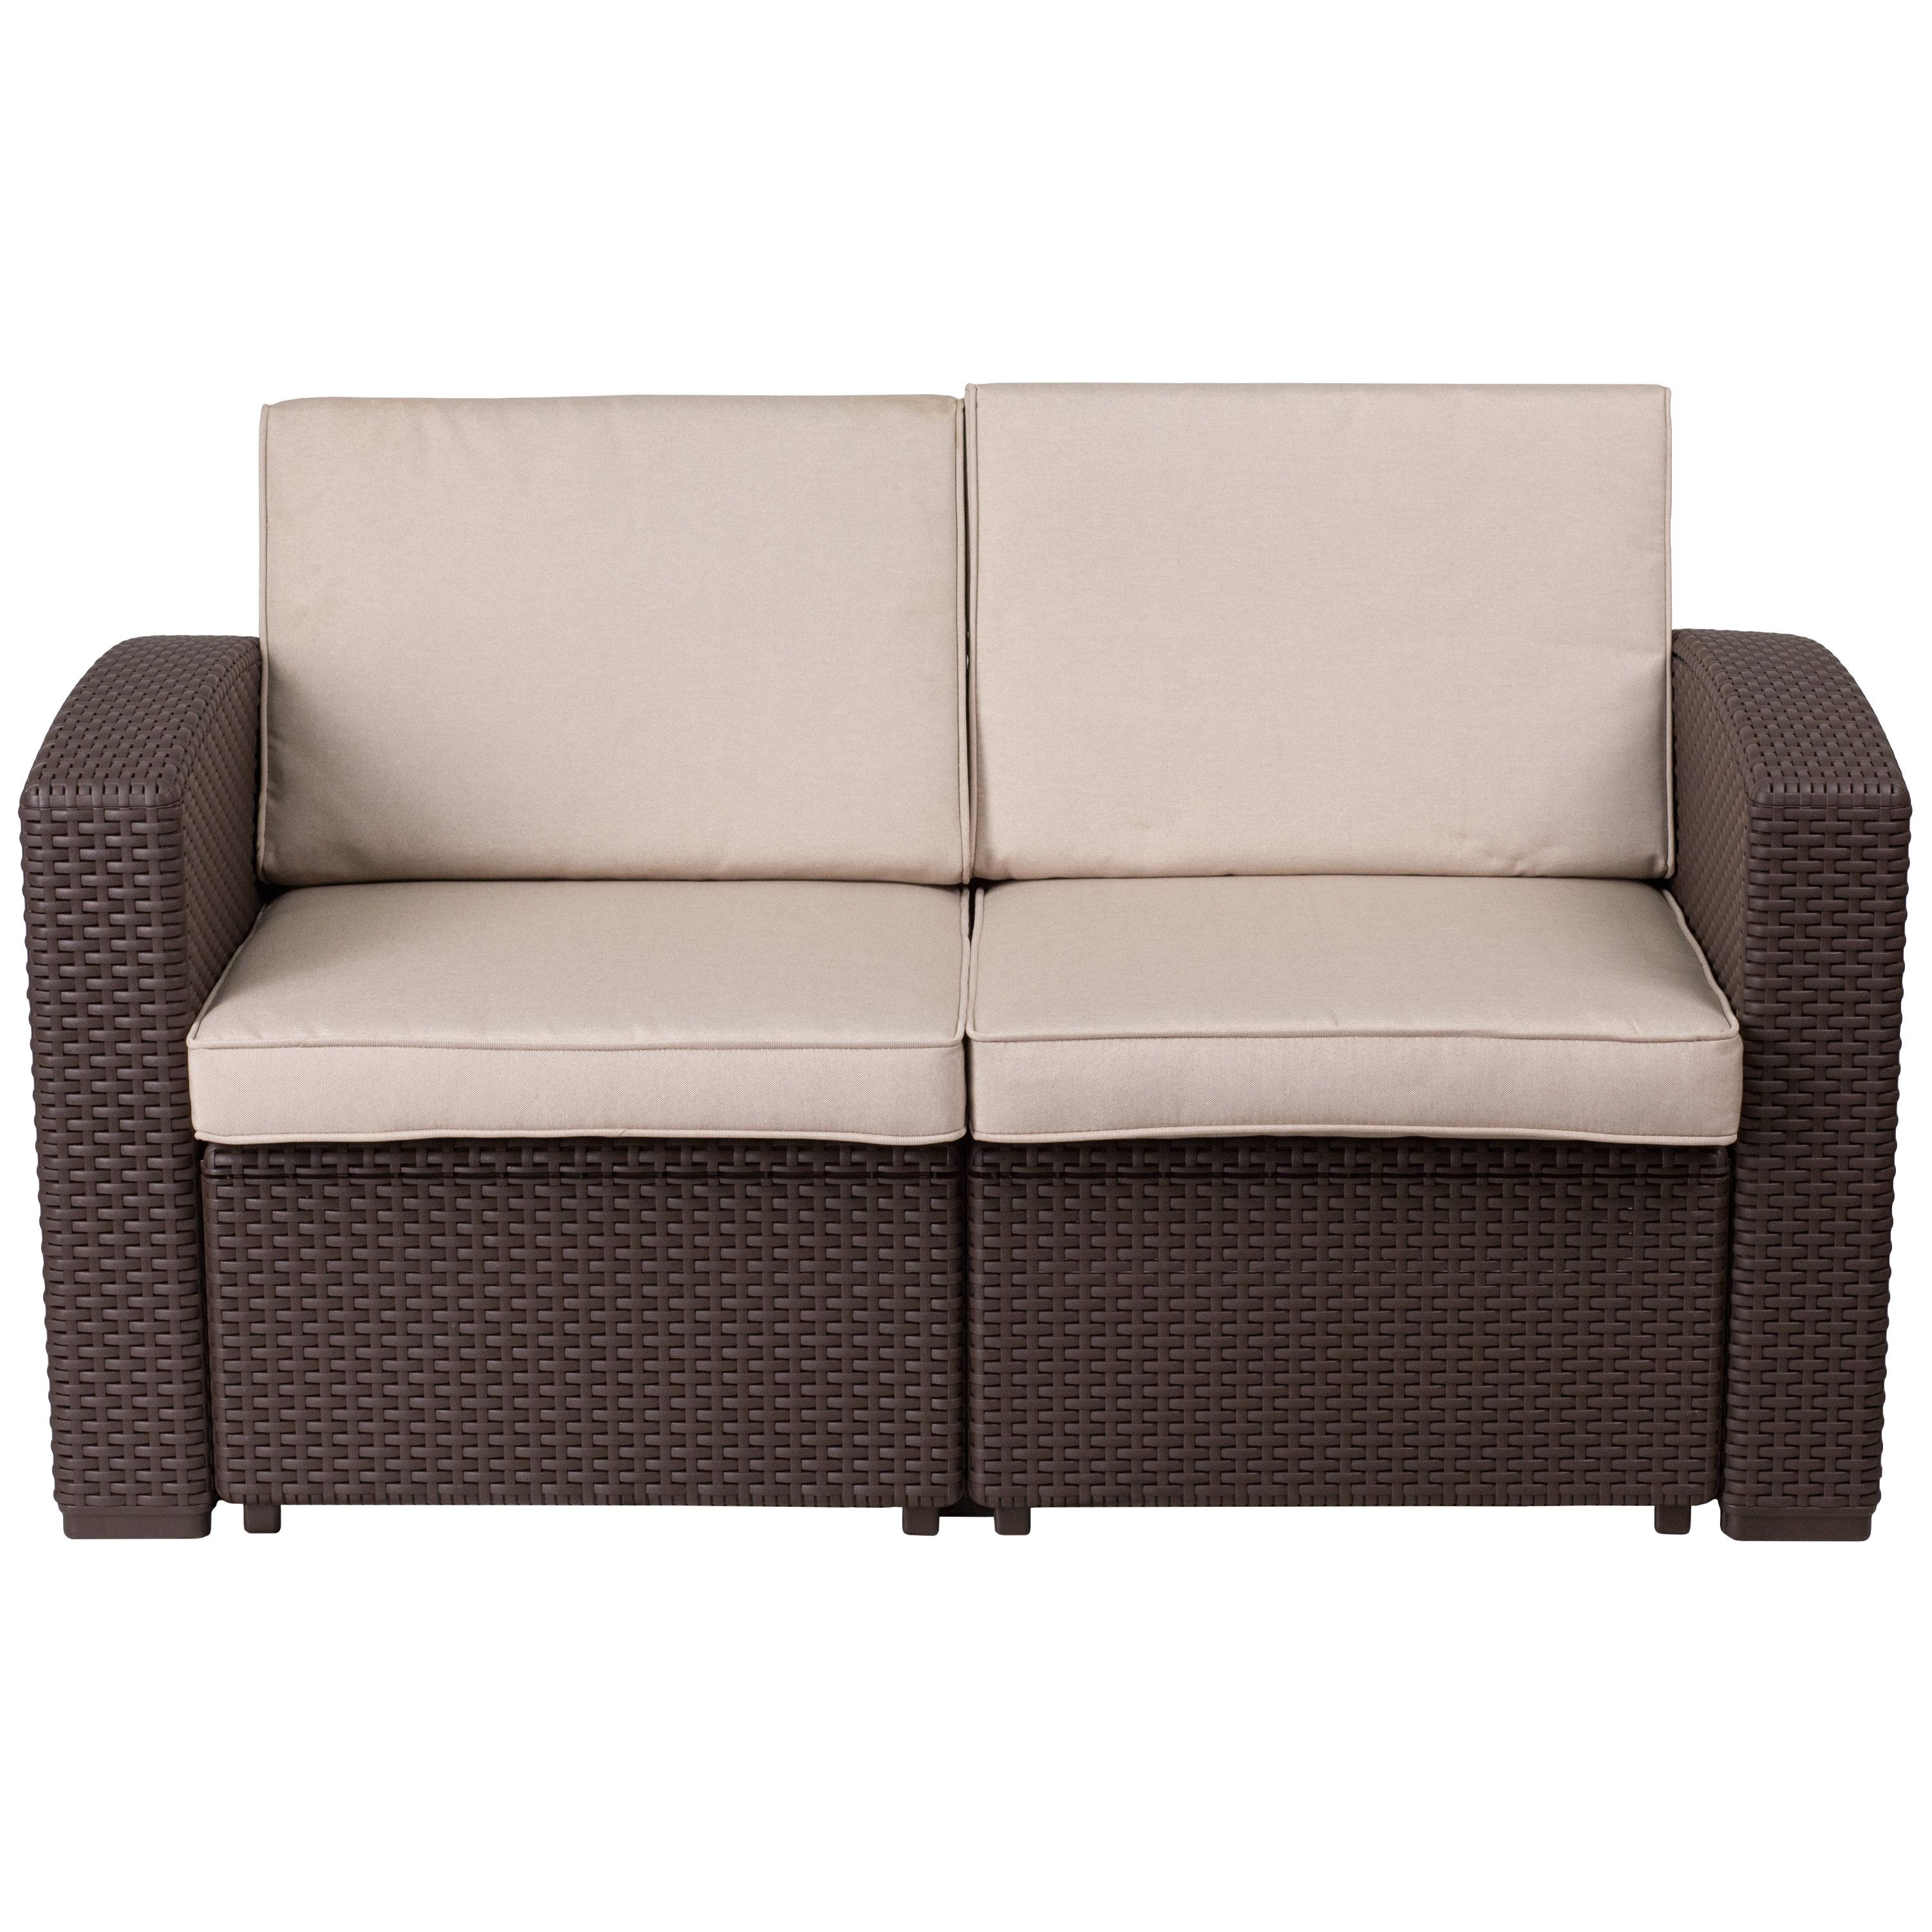 Most Recently Released Clifford Loveseat With Cushion Inside Nadine Loveseats With Cushions (View 14 of 20)